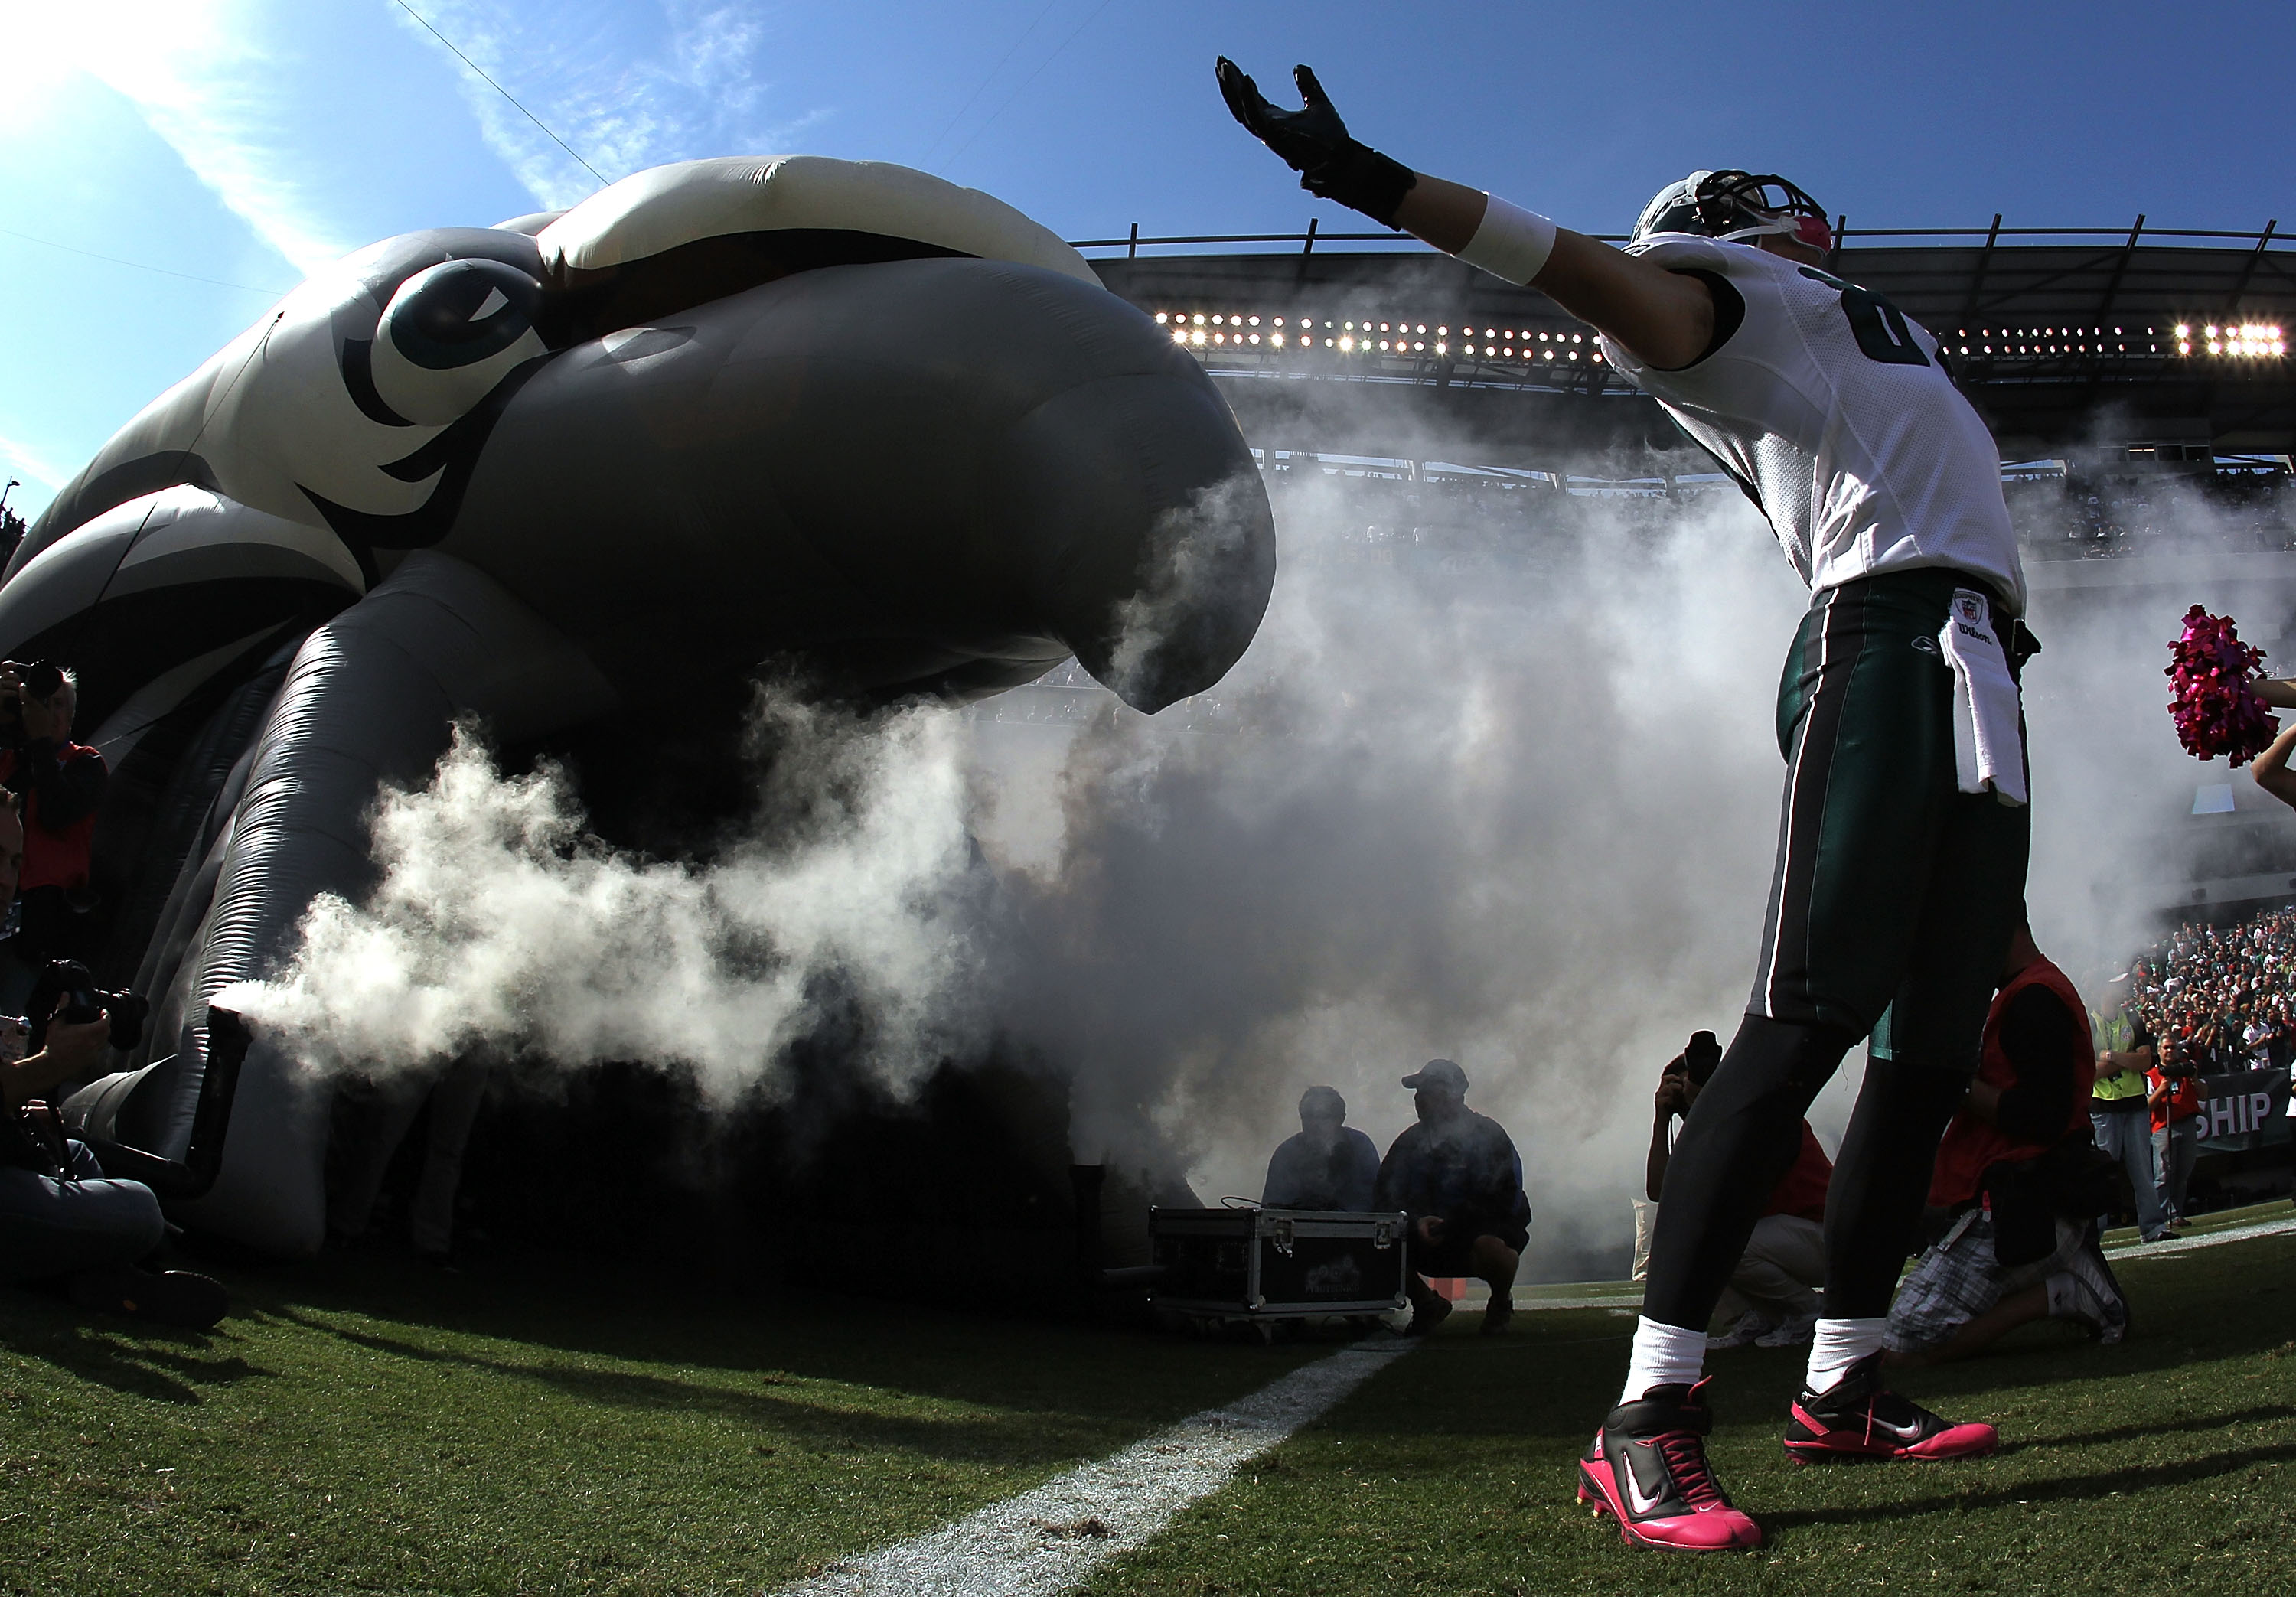 PHILADELPHIA - OCTOBER 17:  A member of the Philadelphia Eaglesenters the game against the Atlanta Falcons at Lincoln Financial Field on October 17, 2010 in Philadelphia, Pennsylvania.  (Photo by Al Bello/Getty Images)